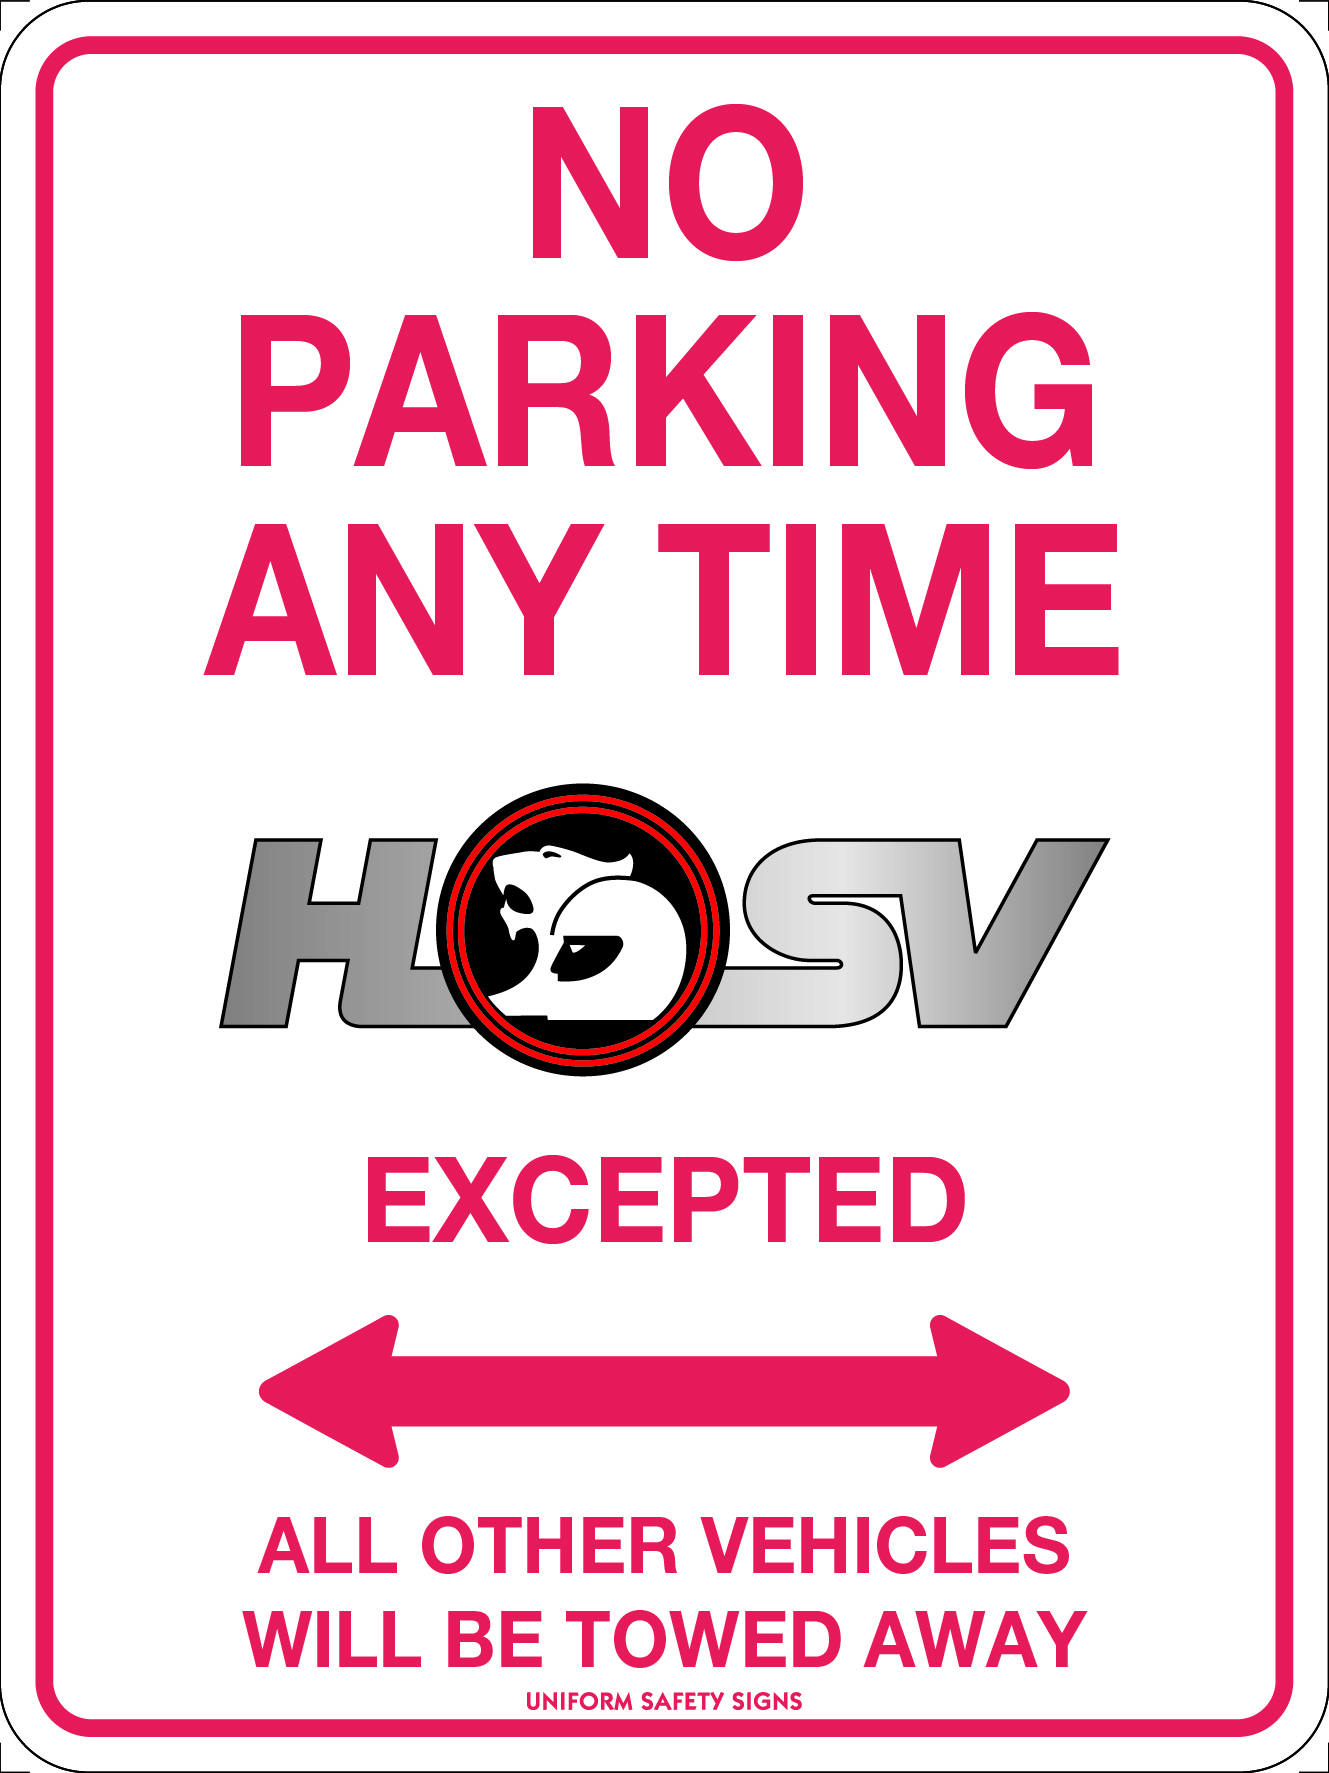 SIGN 300 X 225MM METAL NO PARKING ANYTIME HSV EXCEPTED 